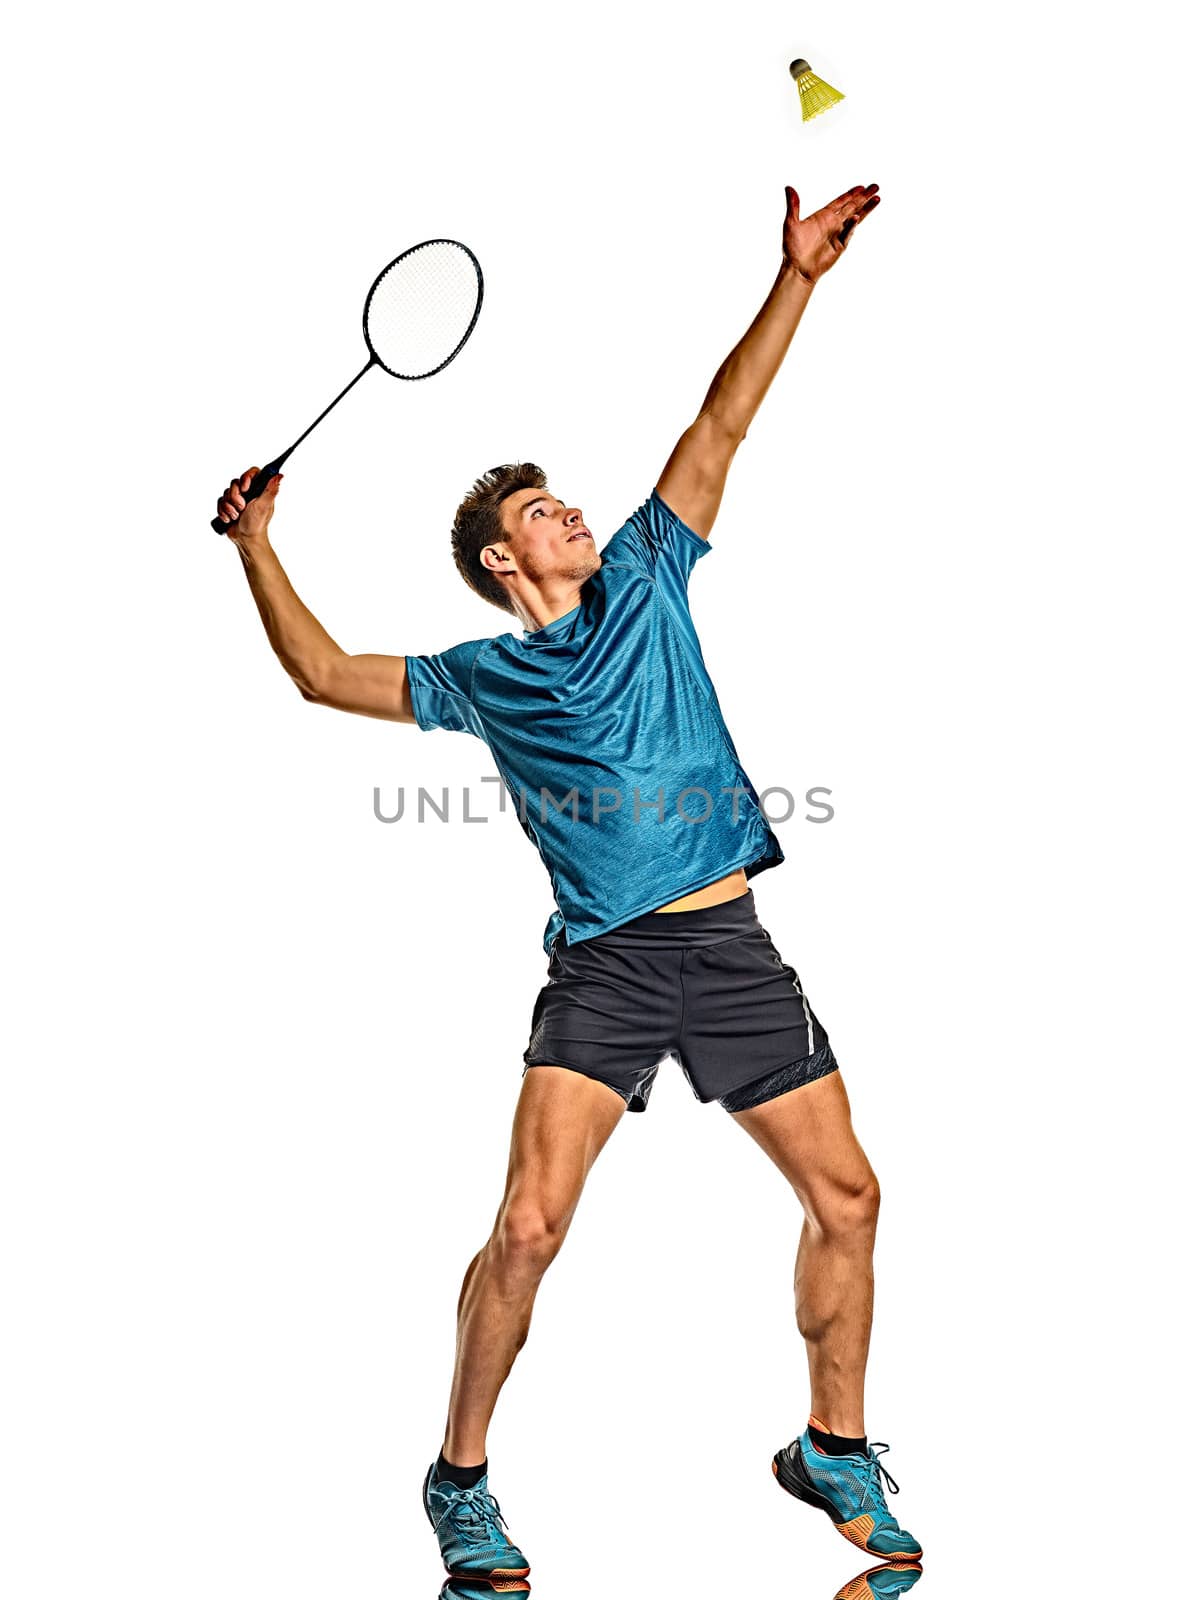 one caucasian youg Badminton player man in studio isolated on white background